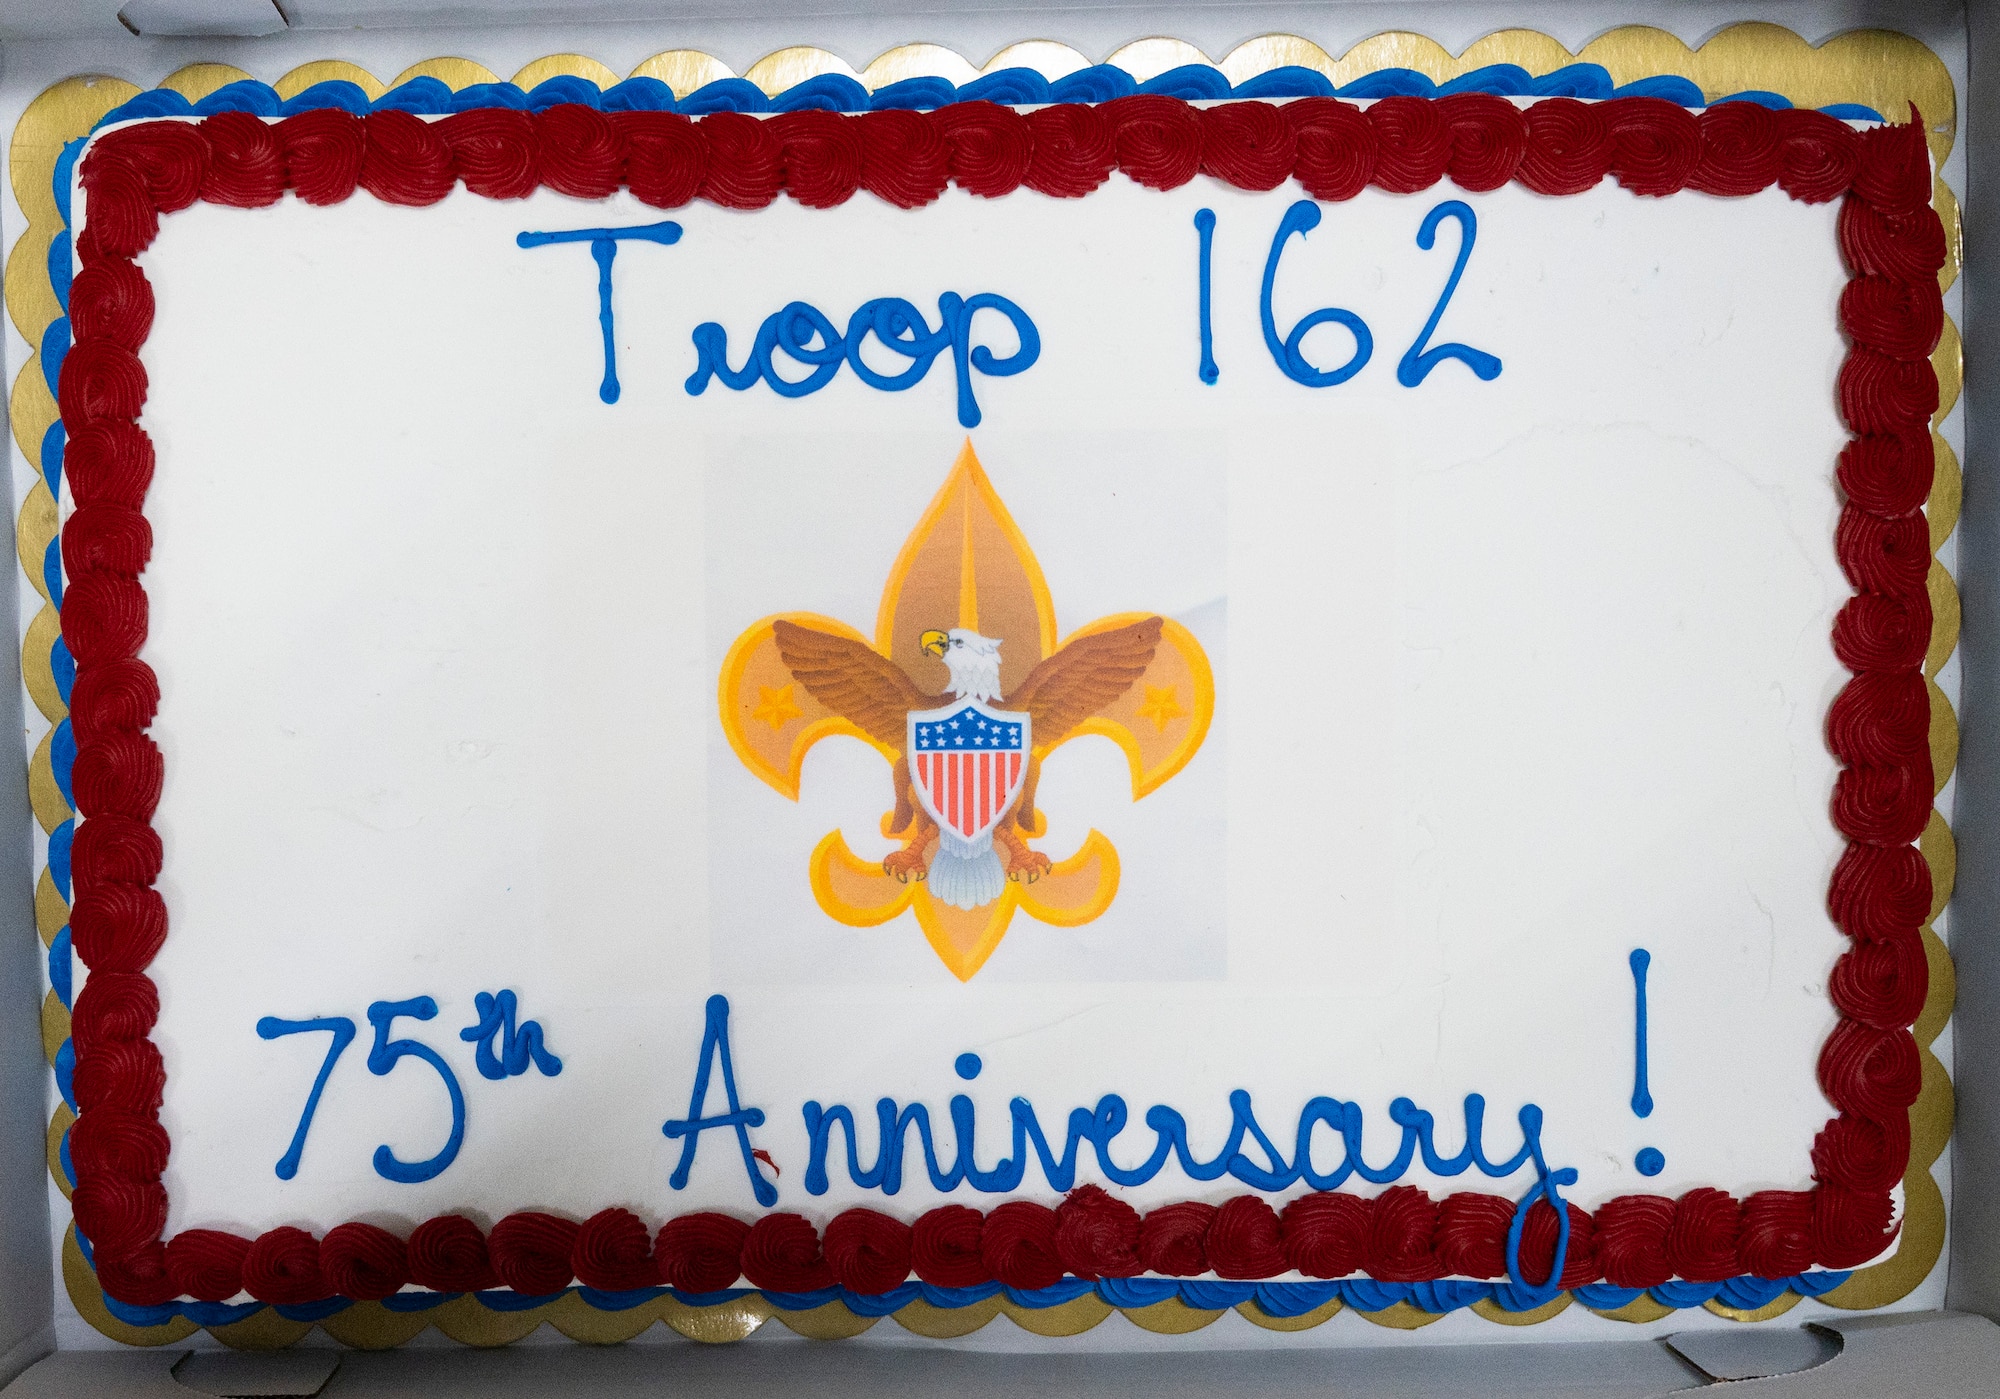 A cake commemorates the 75th anniversary of Boy Scout Troop 162 in Fairborn, Ohio, Dec. 13, 2021. The troop started out as the Wright-Patterson Air Force Base troop in 1946. (U.S. Air Force photo by R.J. Oriez)